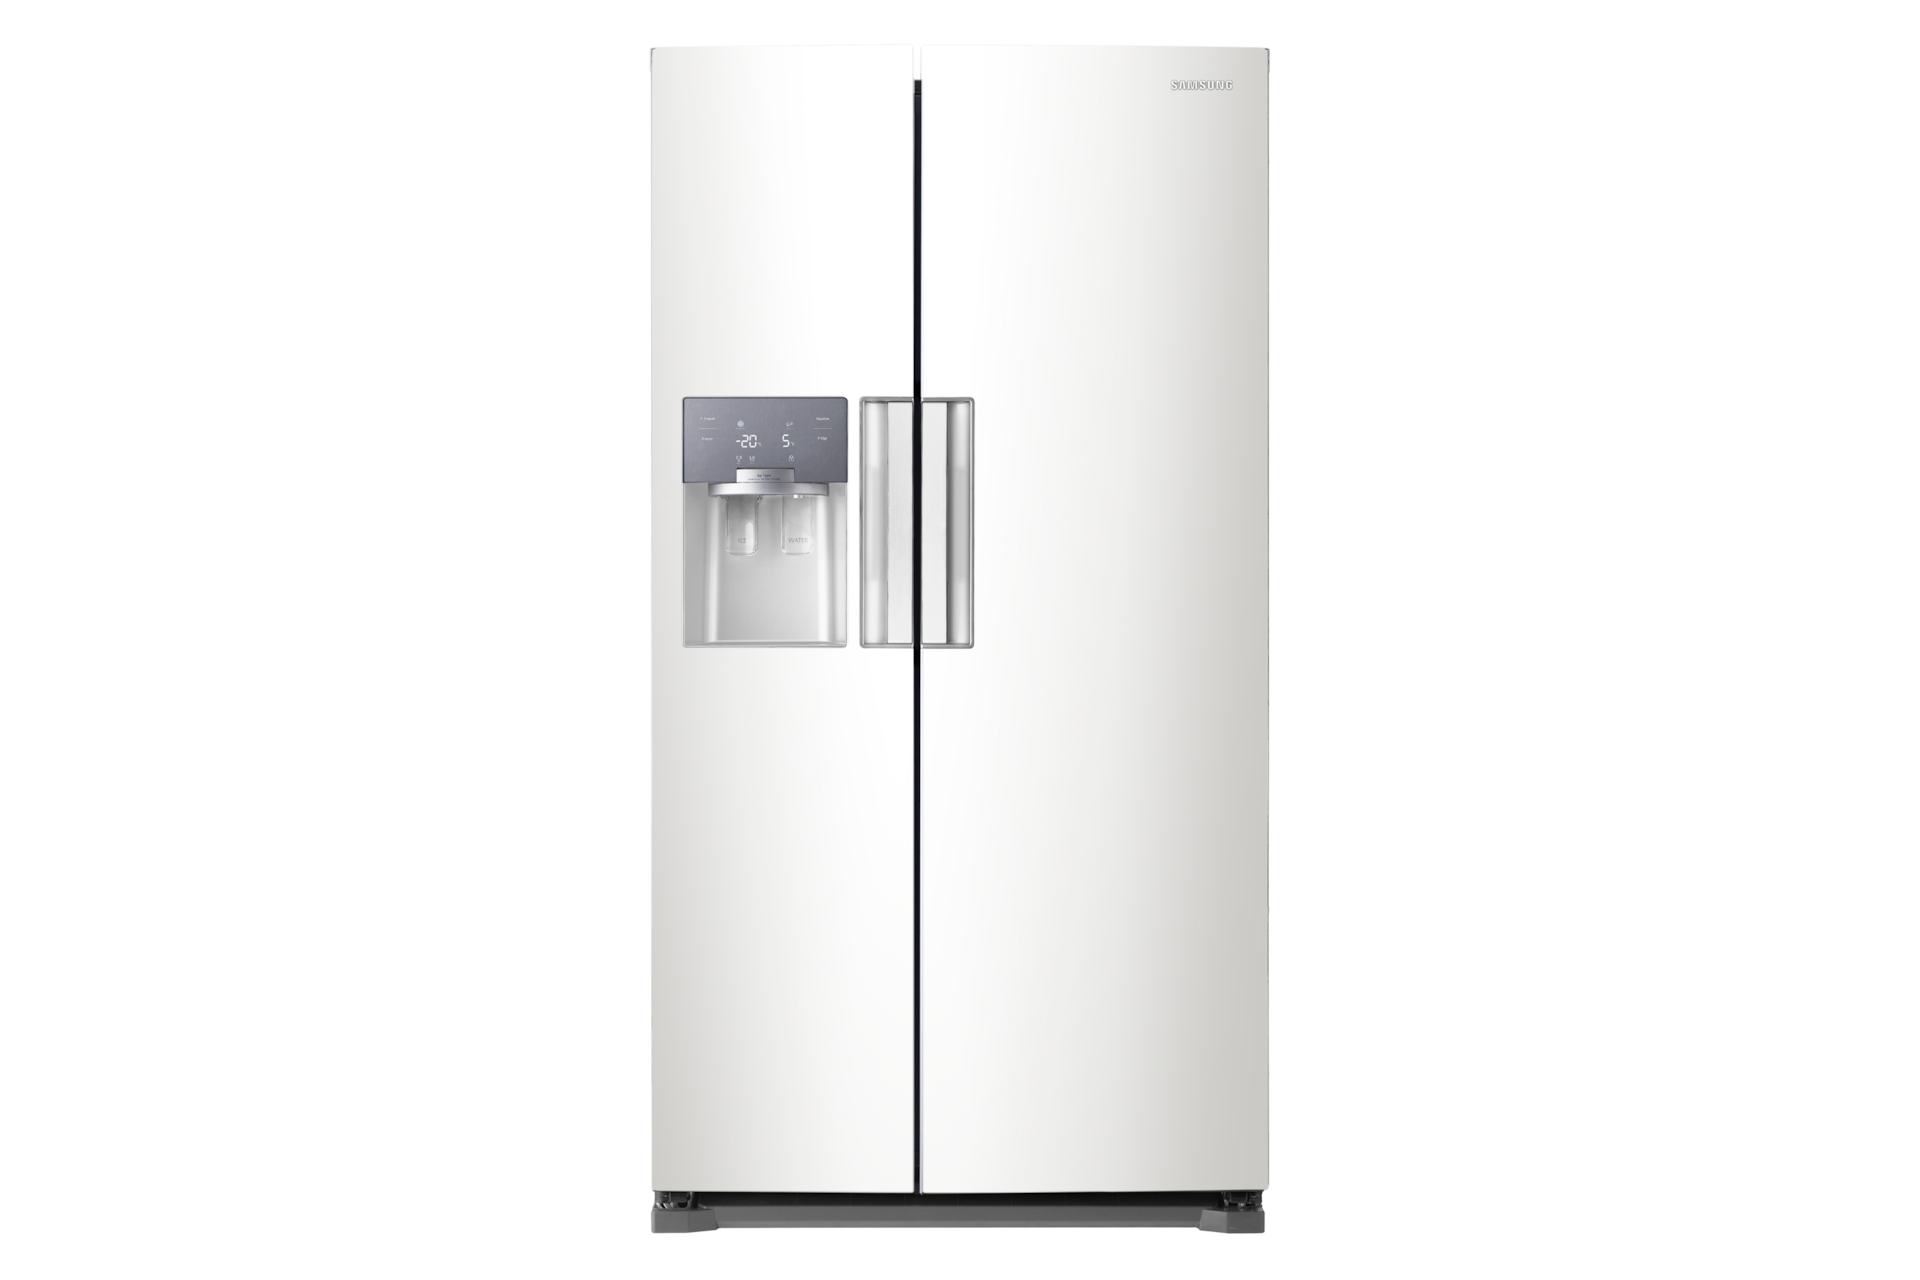 Use the Dual Ice maker on your Samsung refrigerator